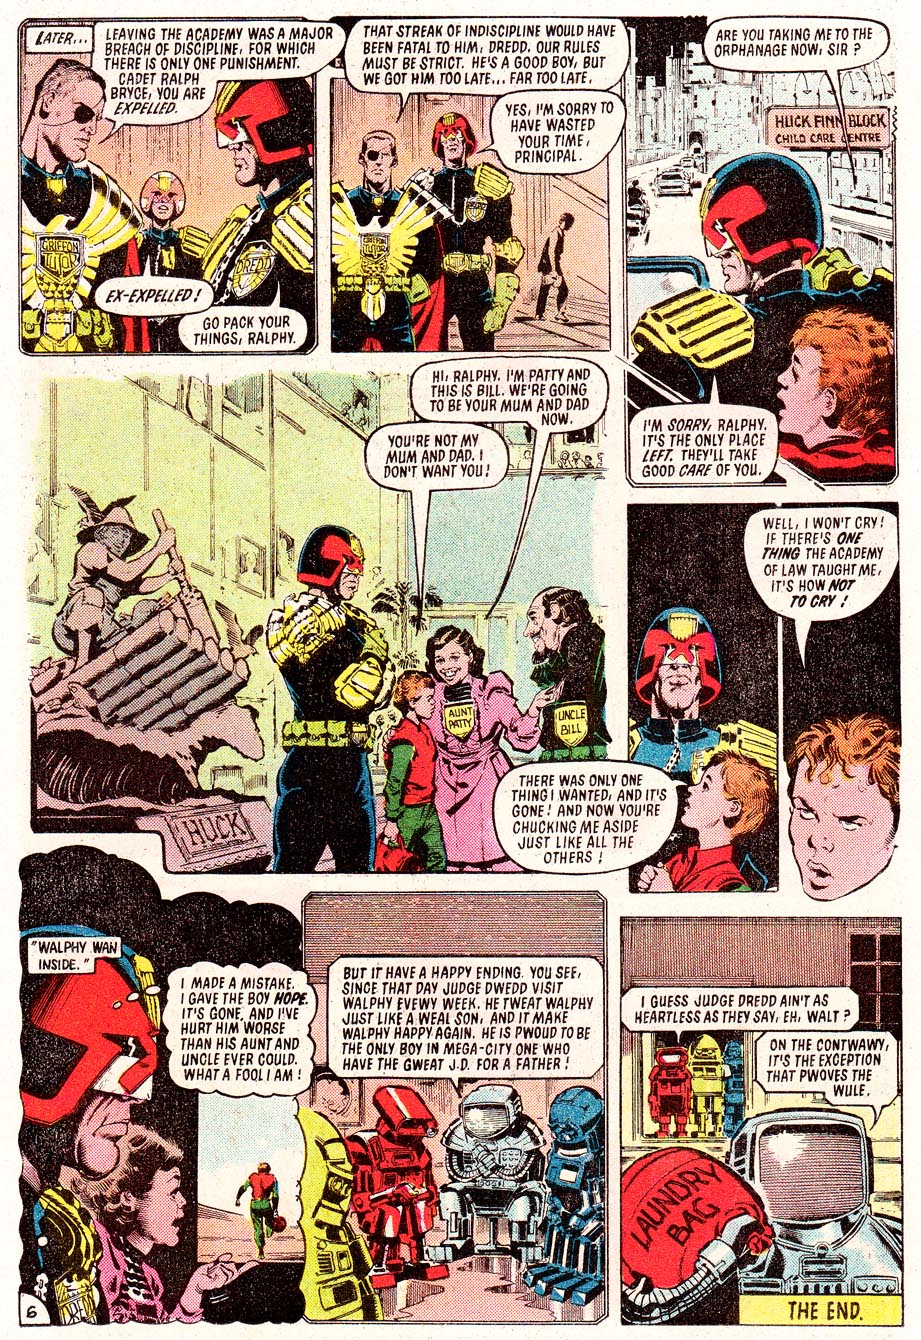 Read online Judge Dredd: The Complete Case Files comic -  Issue # TPB 3 - 31